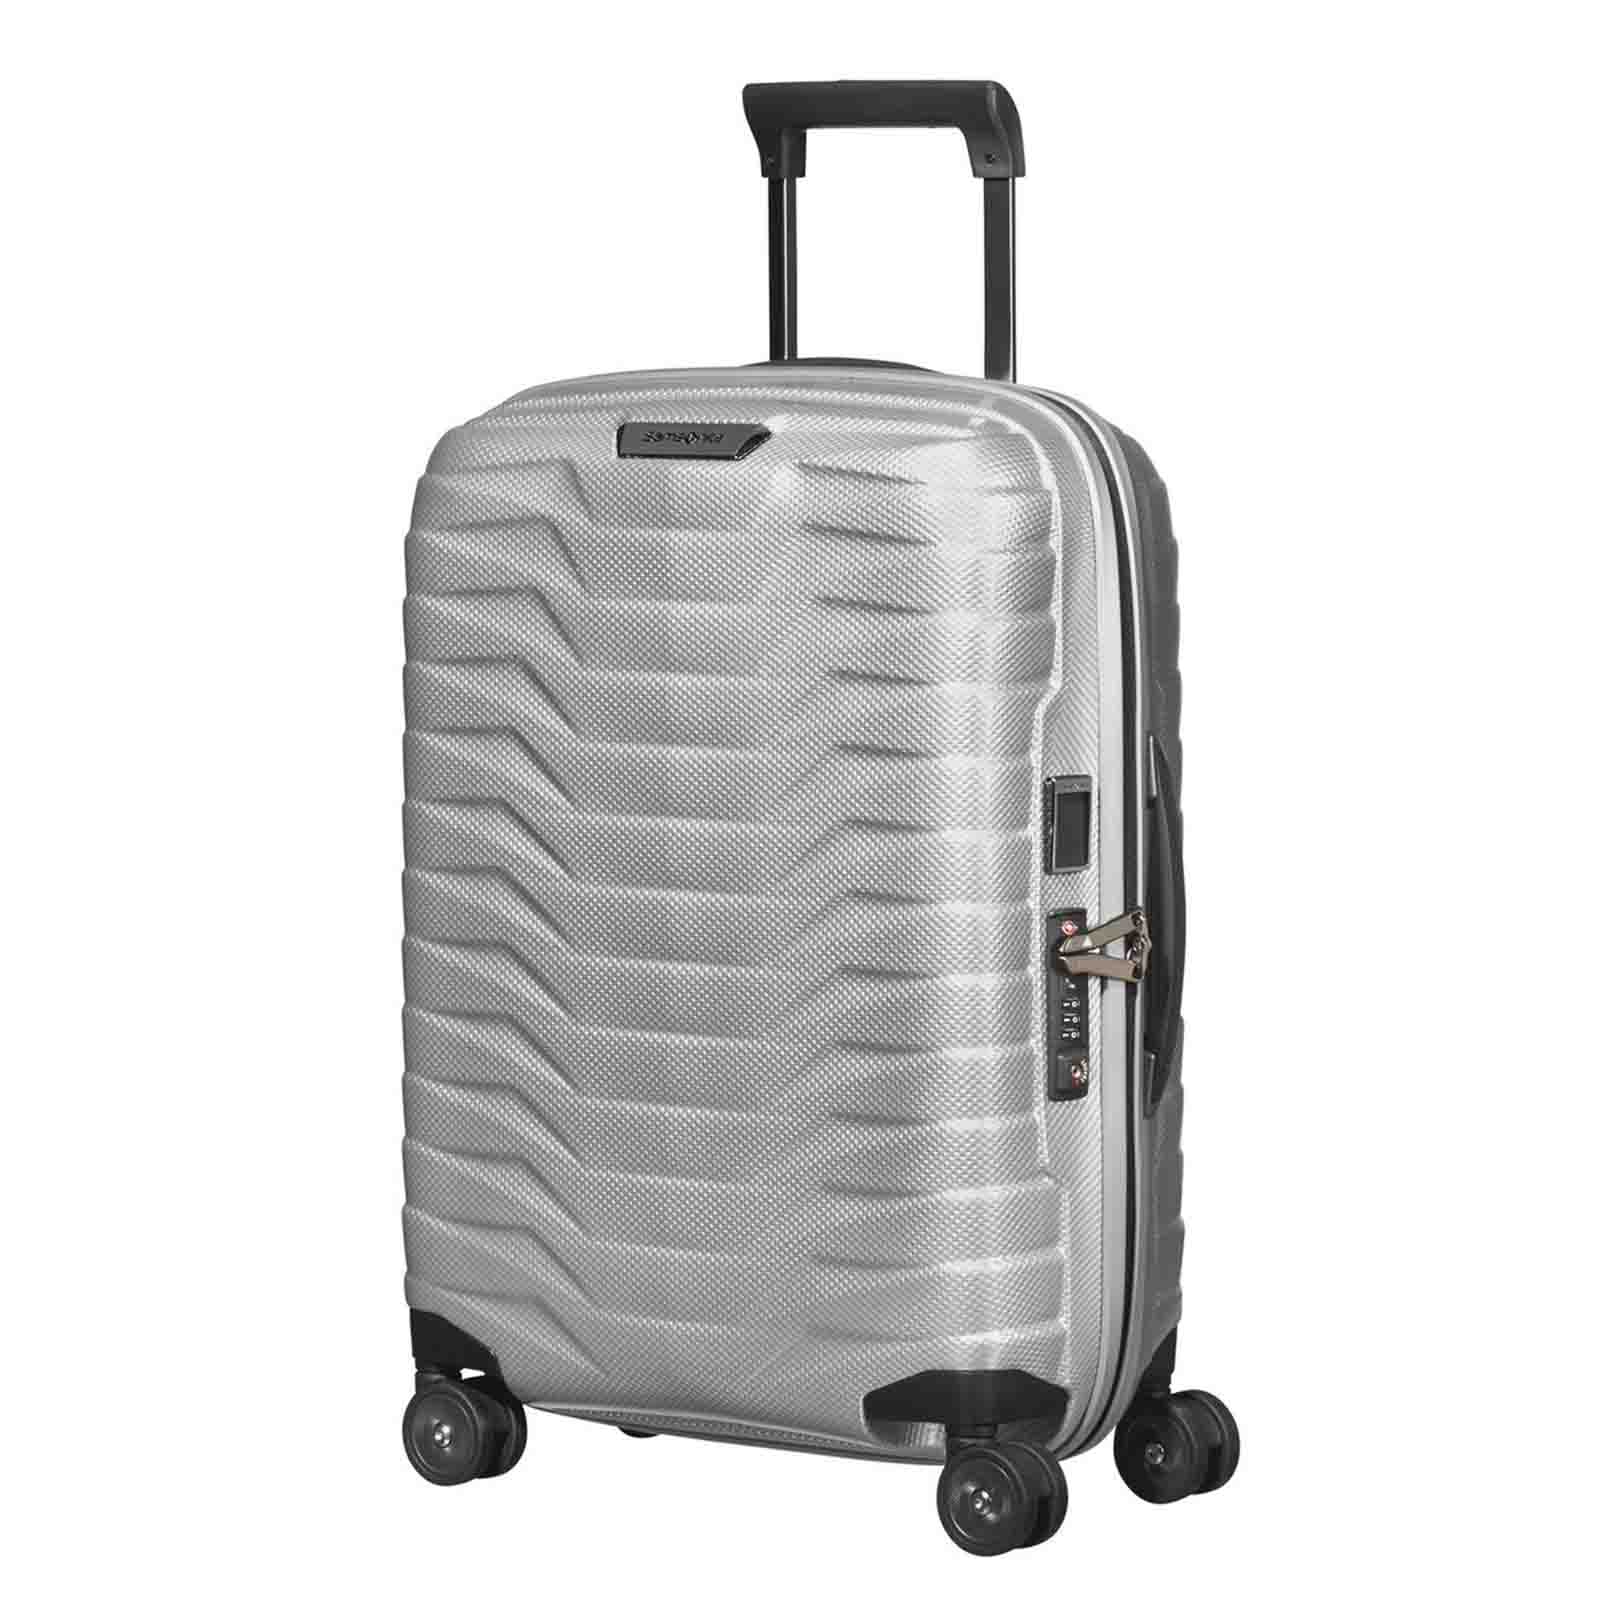 Samsonite-Proxis-55cm-Suitcase-Silver-Front-Angle